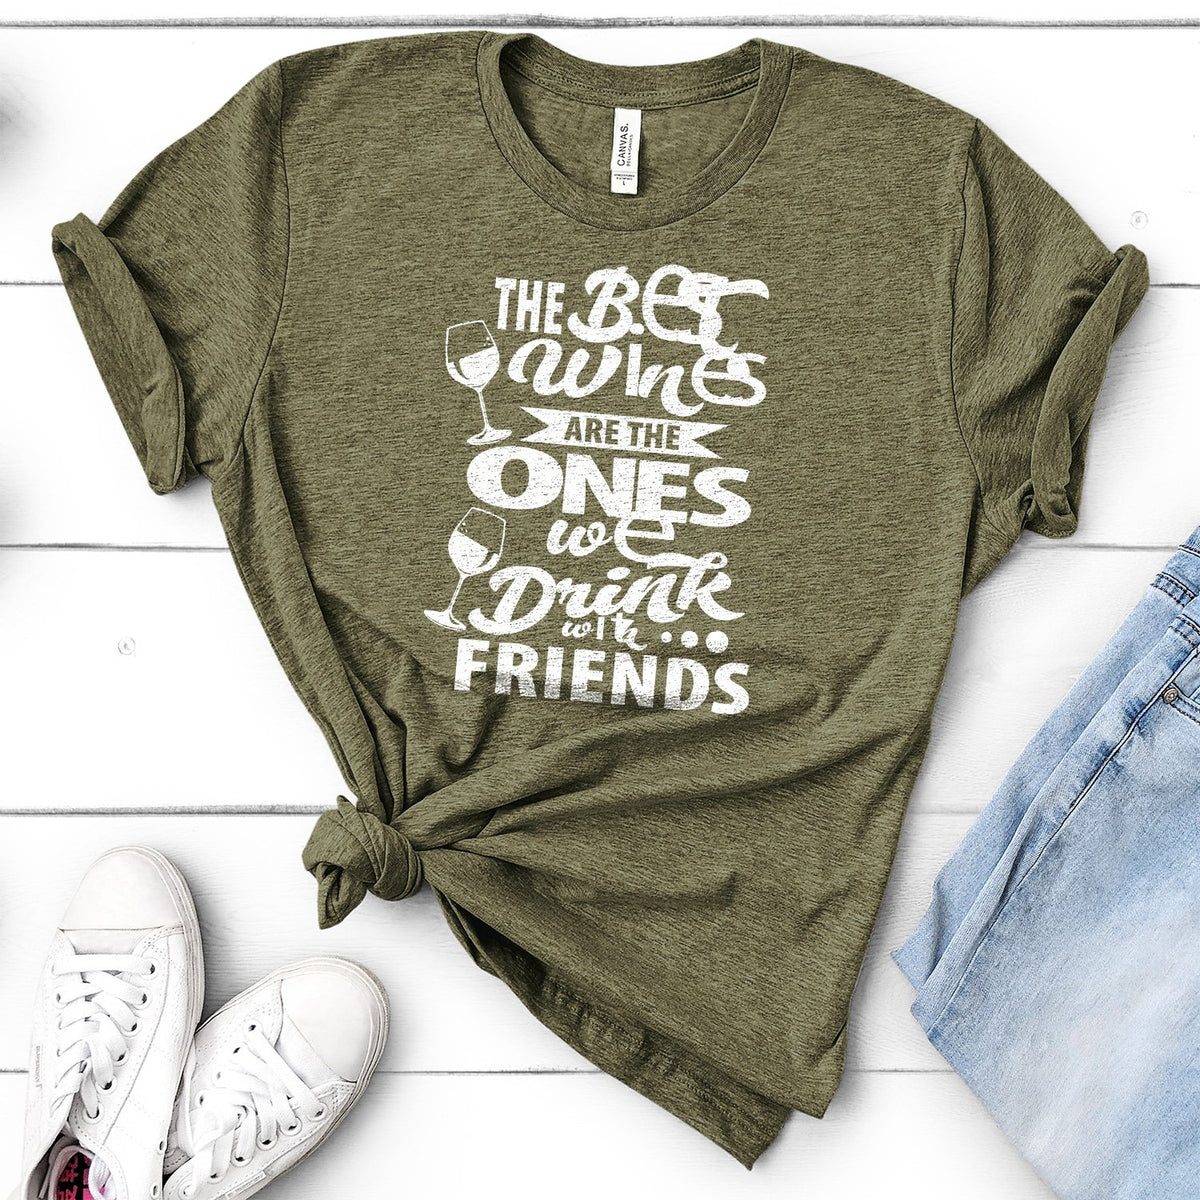 The Best Wines Are The Ones We Drink With Friends - Short Sleeve Tee Shirt